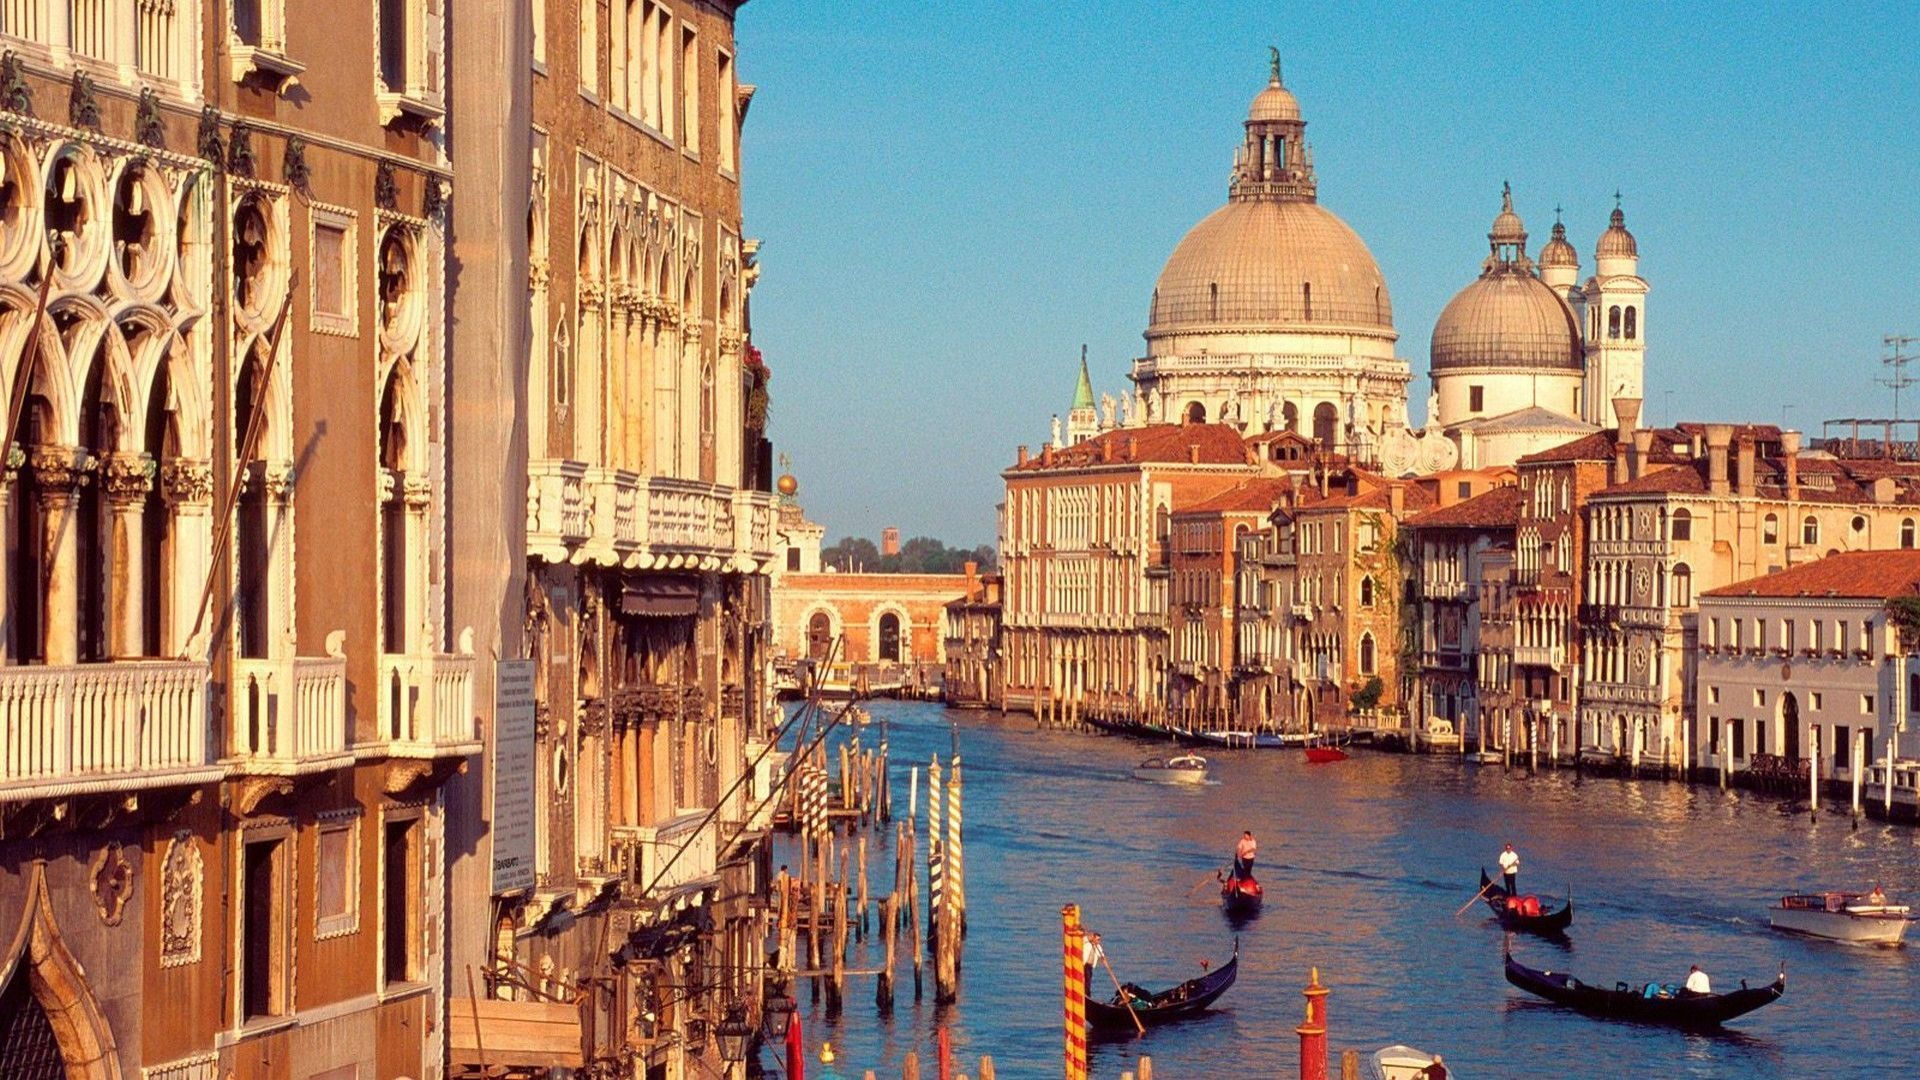 Top Venice In Italy 39 Images for Pinterest